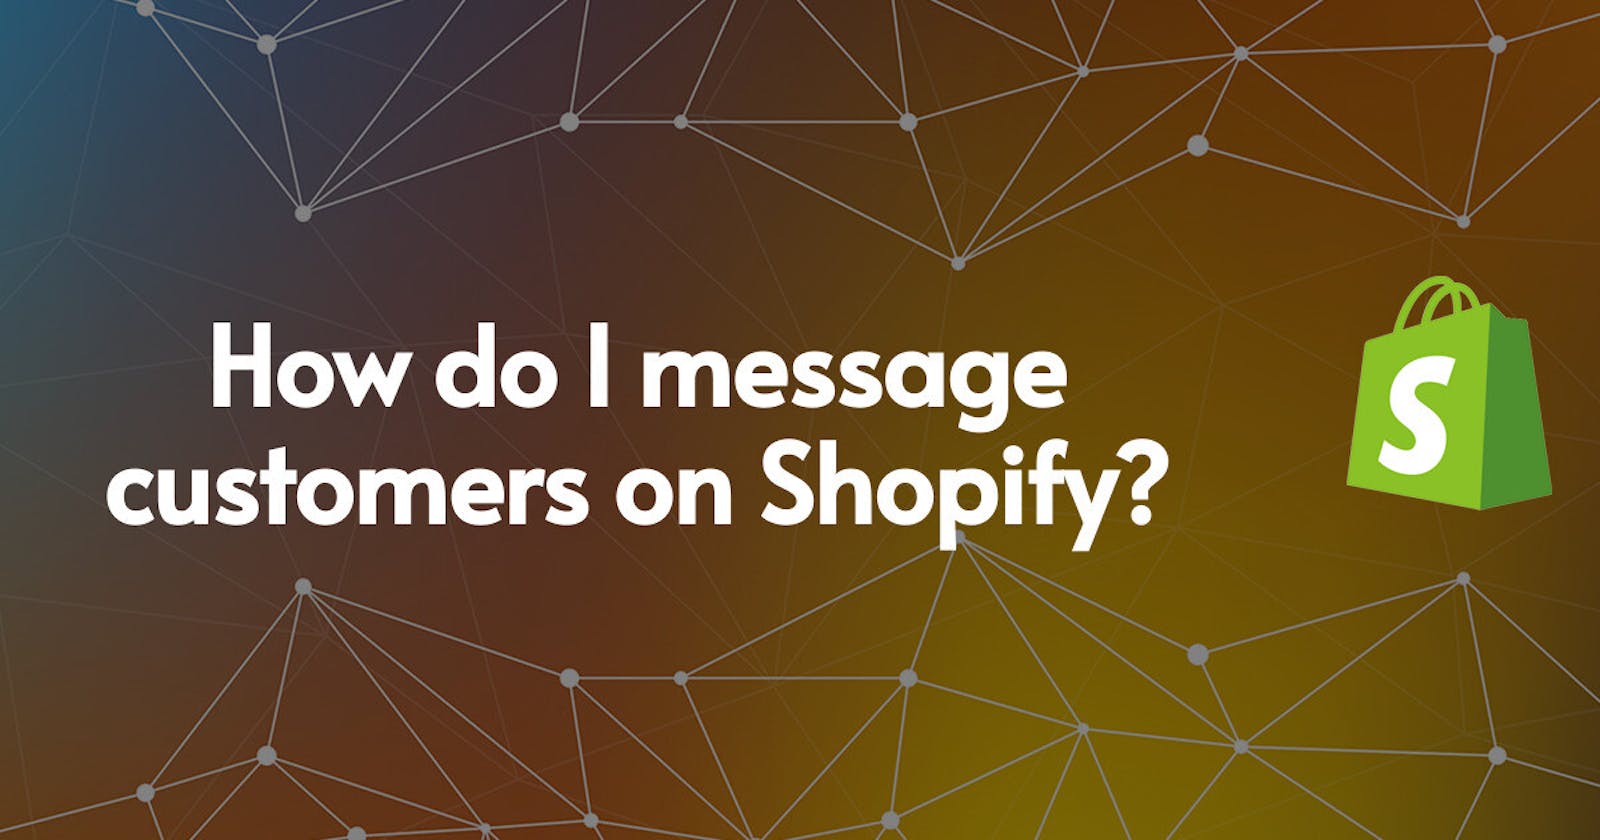 How do I message customers on Shopify?